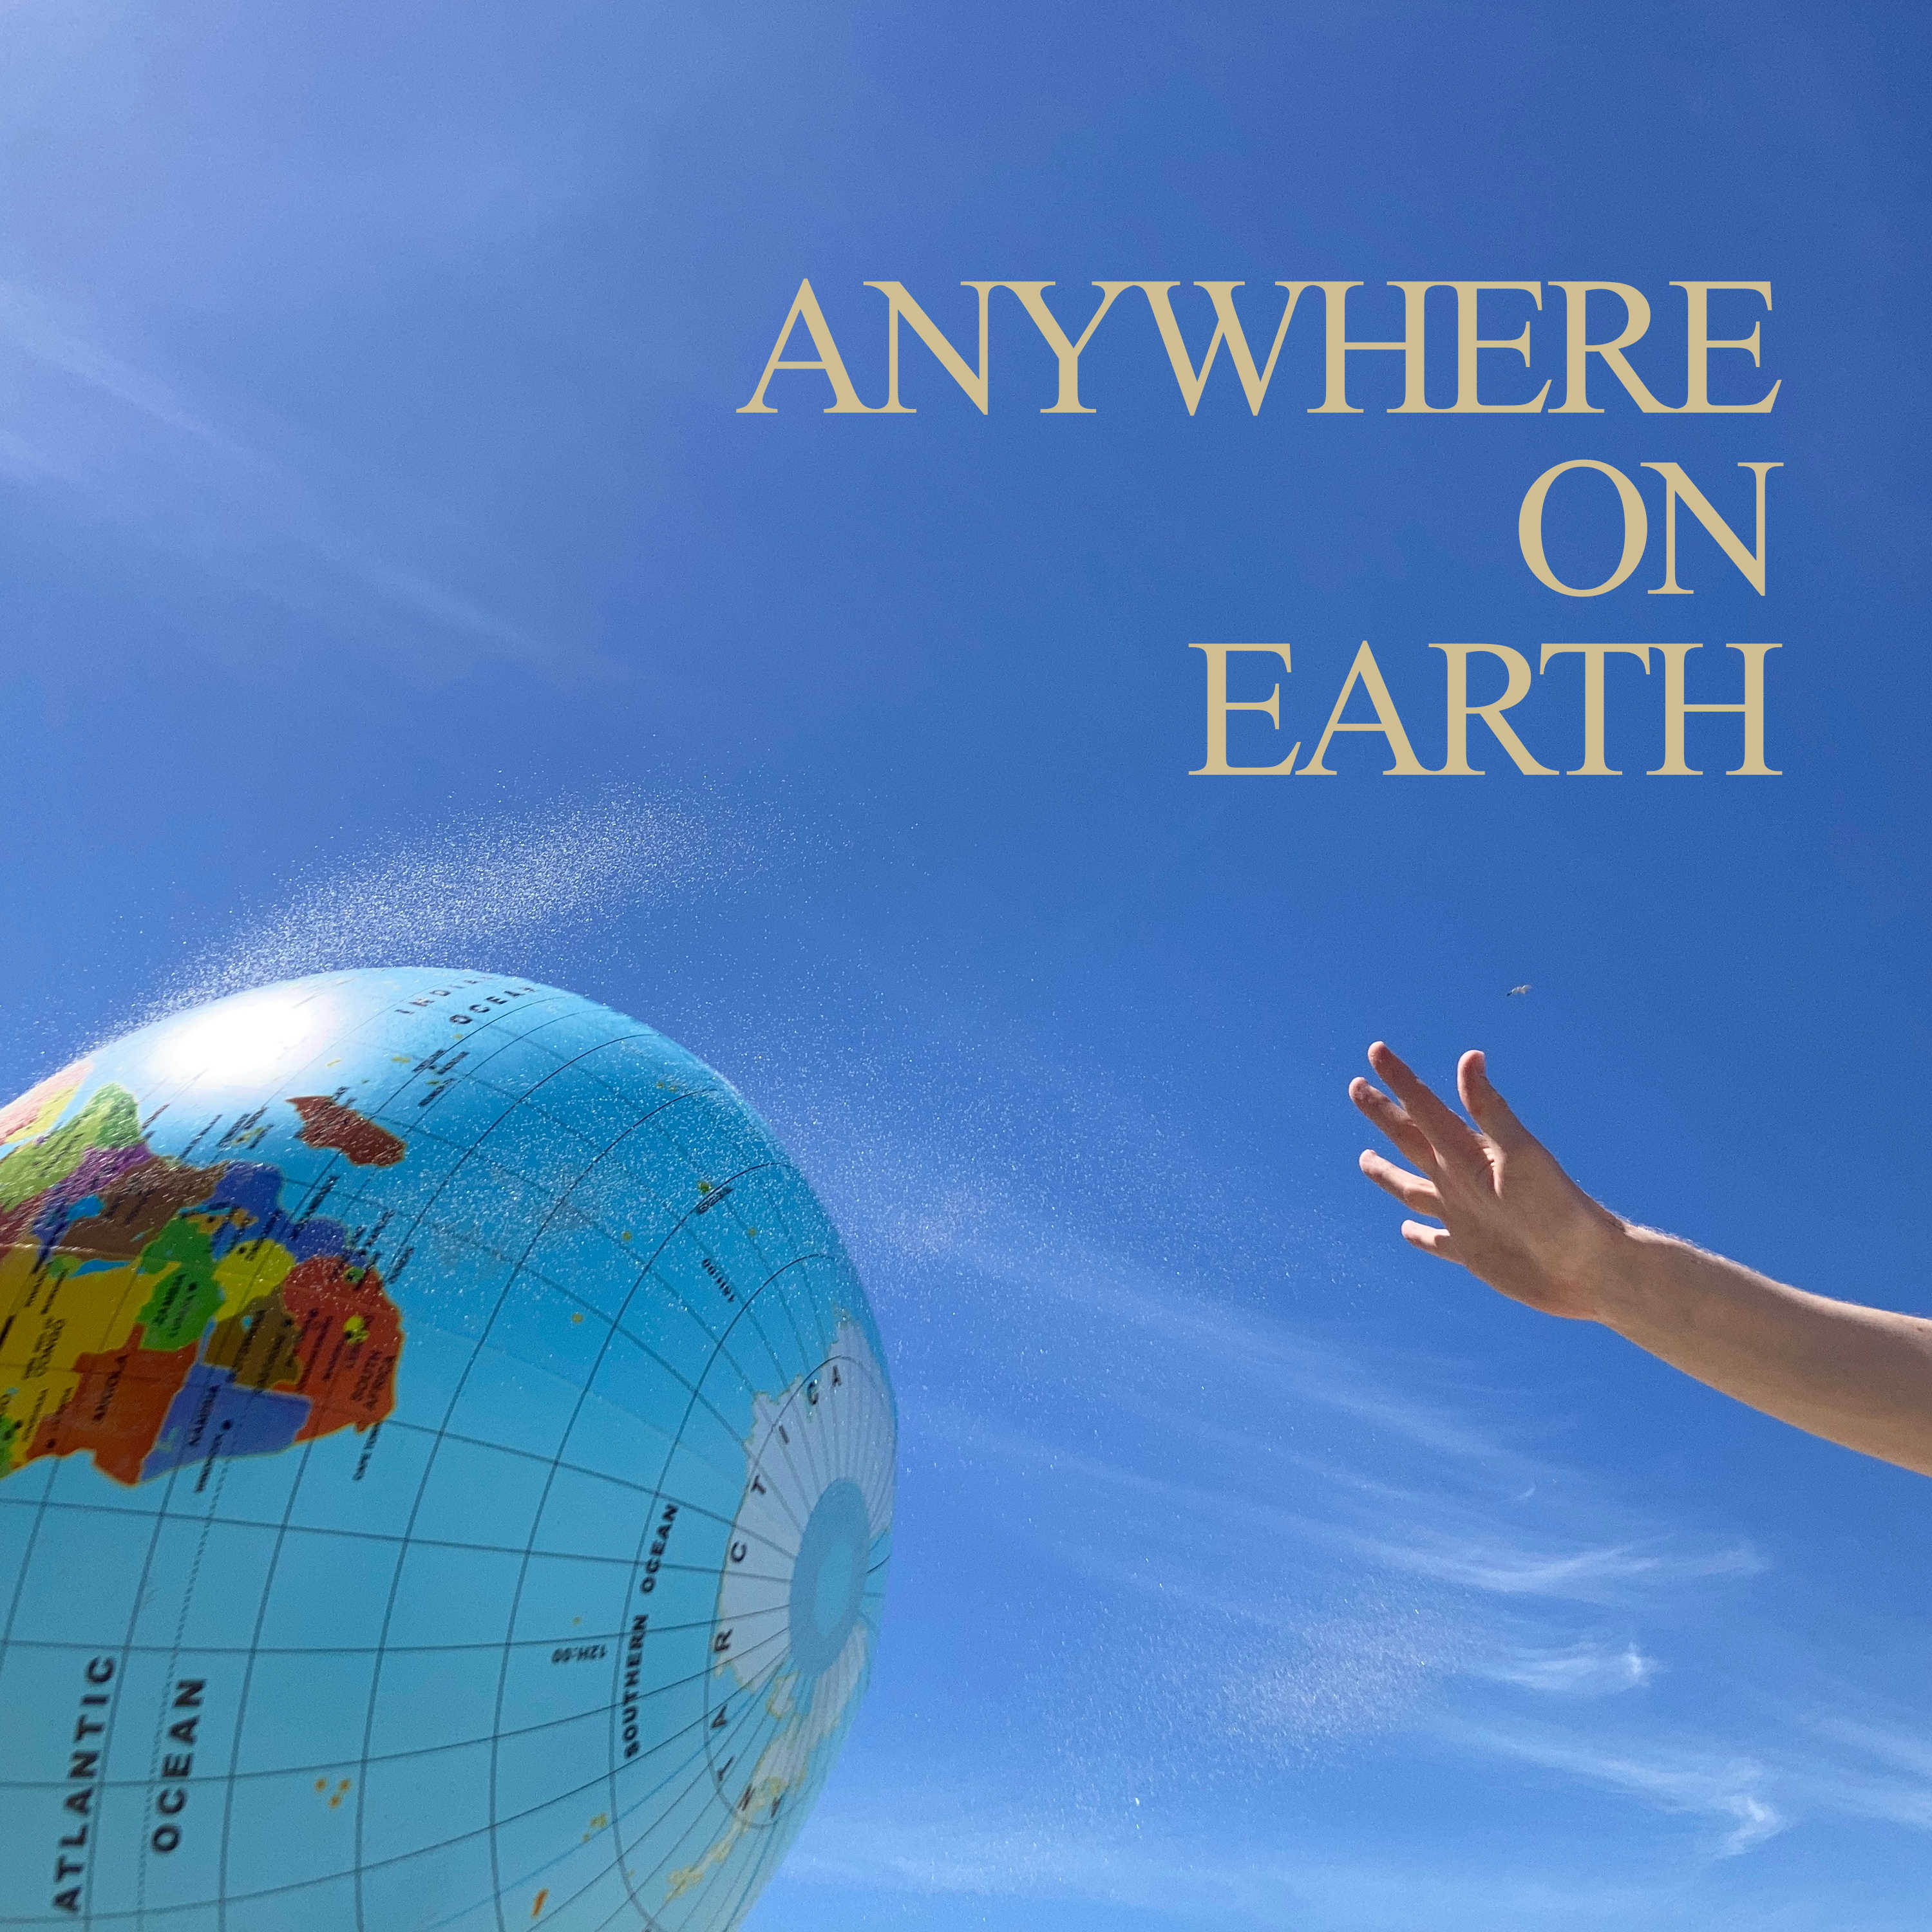 Anywhere on Earth album cover showing serif text in the northeast quadrant. Southern half of the art shows a large earth map globe beach ball just after being hit by a raised arm.